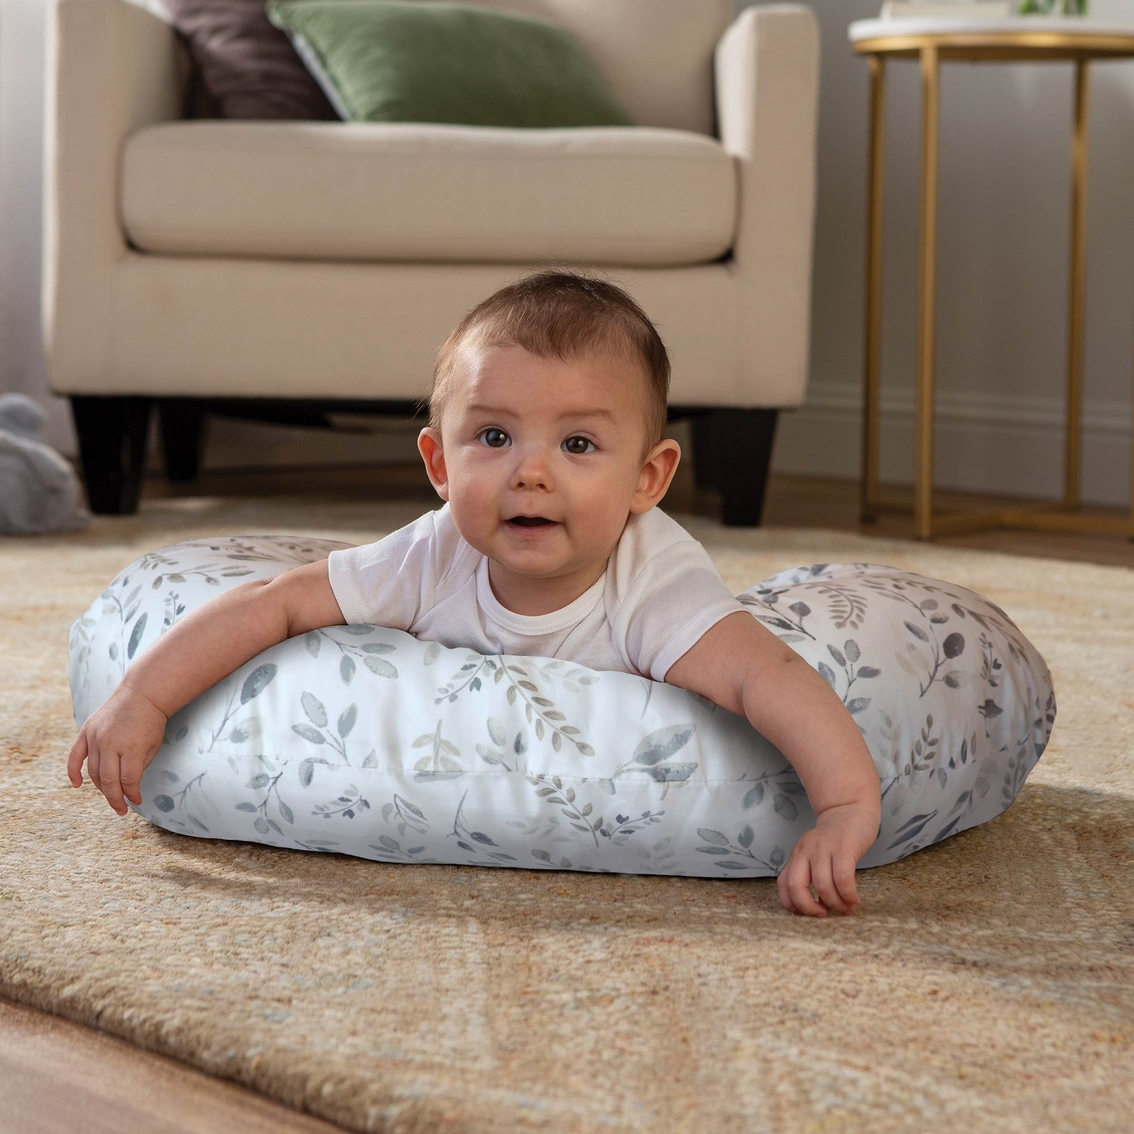 Boppy Infant Feeding and Support Pillow - Image 4 of 6